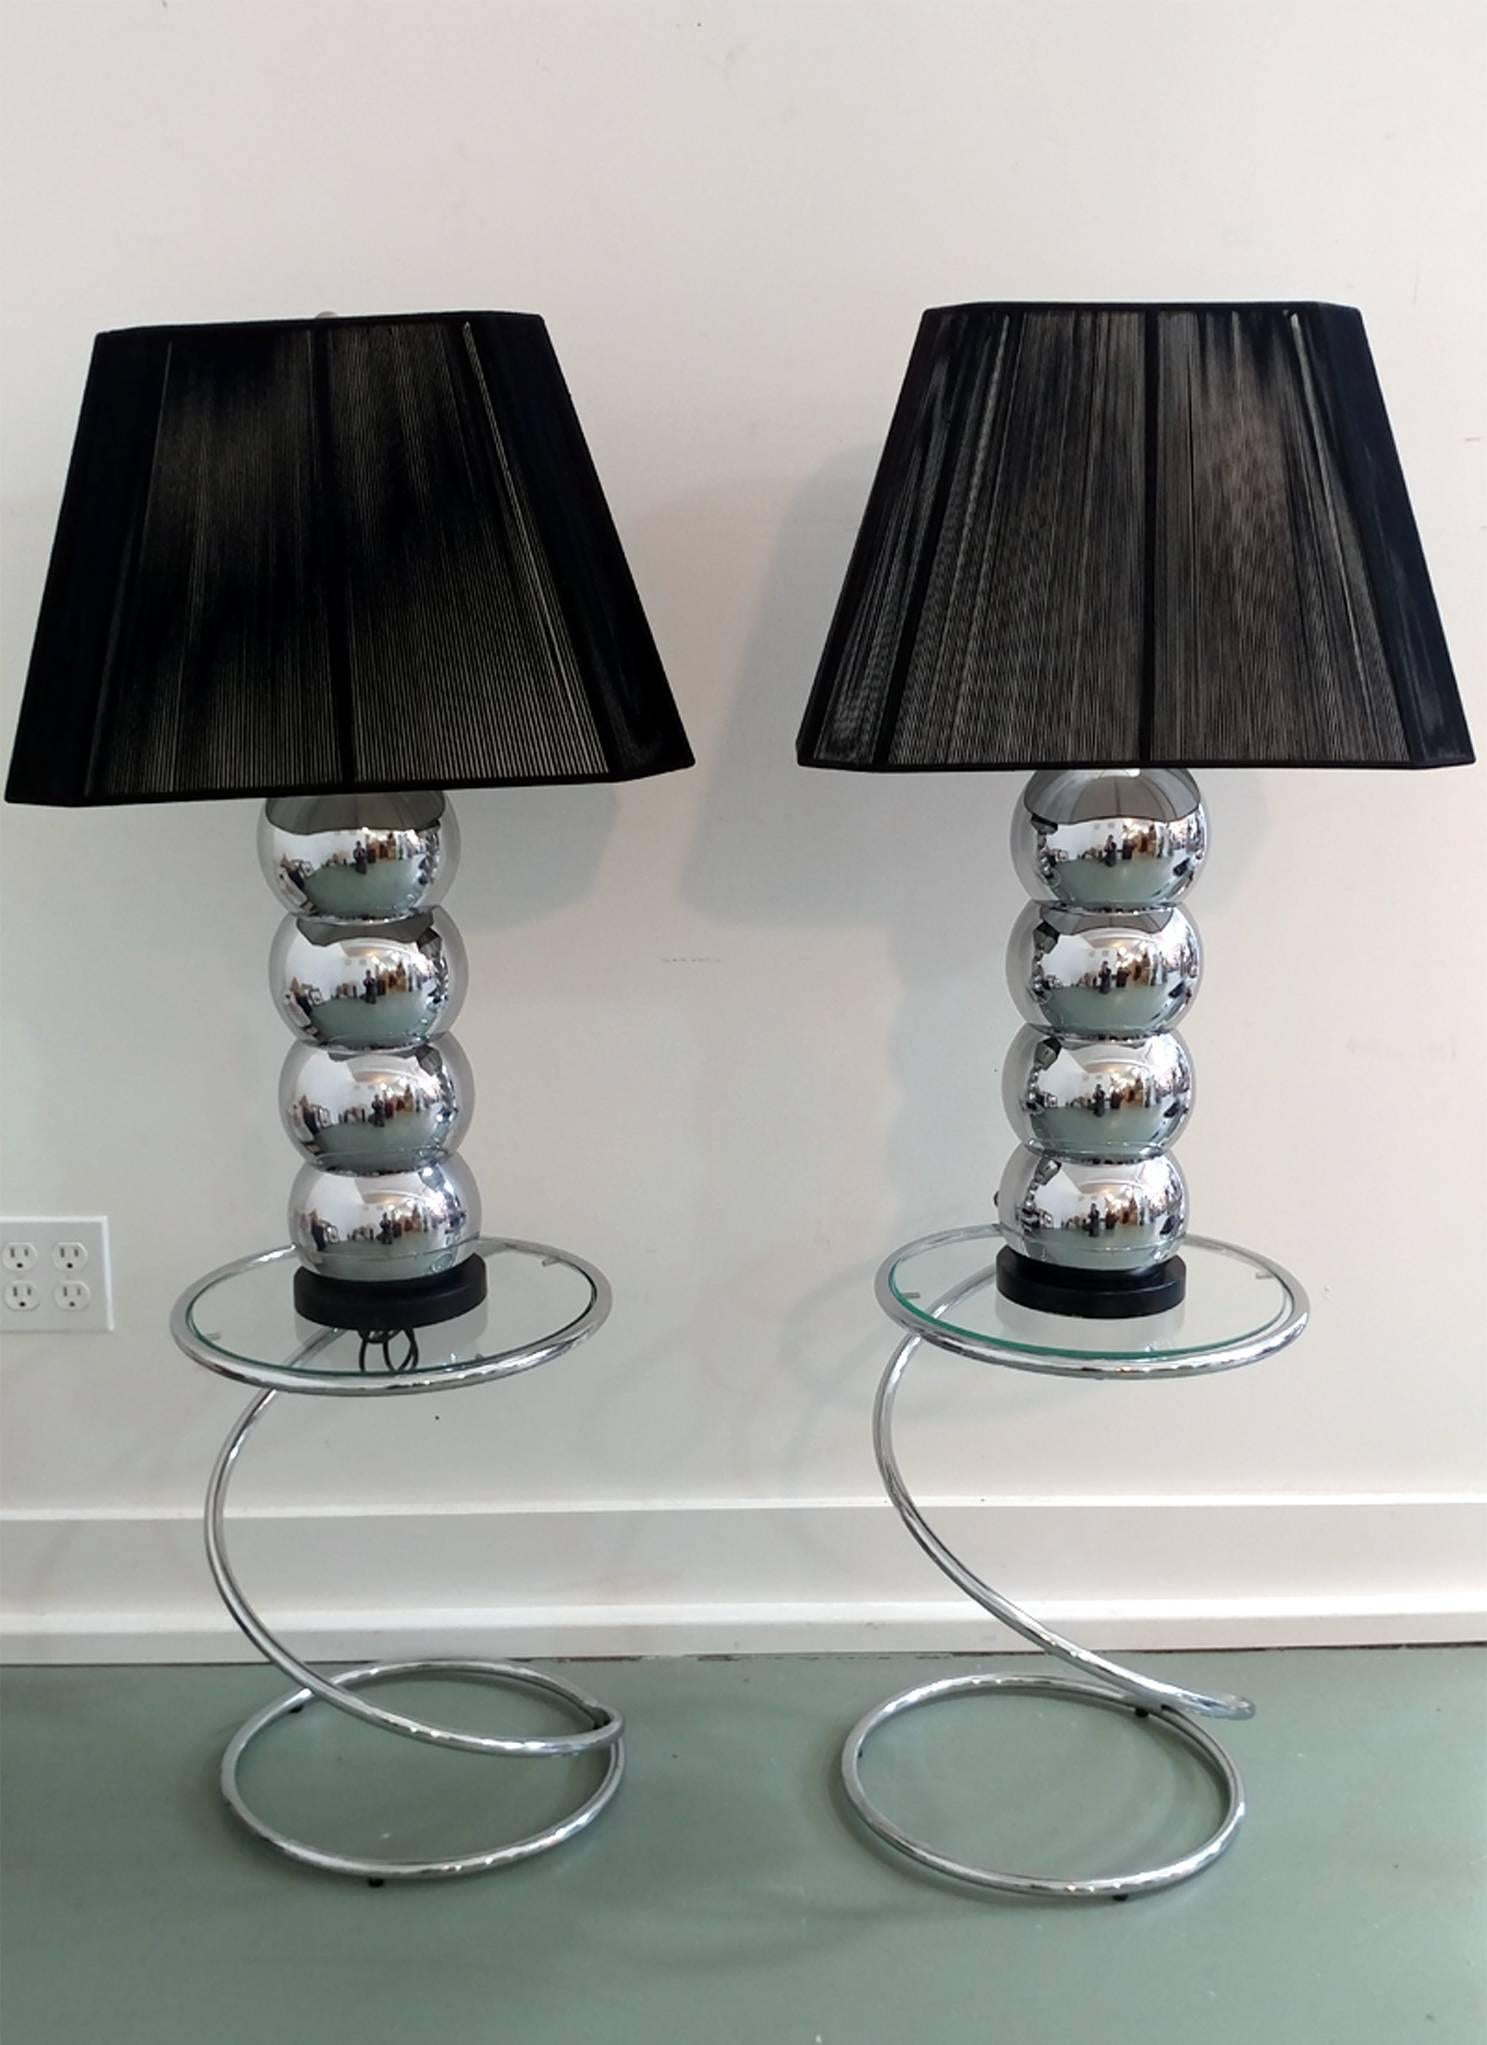 A pair of versatile occasional or bedside tables in modern spiral form designed by Leon Rosen for Pace. Polished chrome frame and glass in good original condition appropriate to age and use.